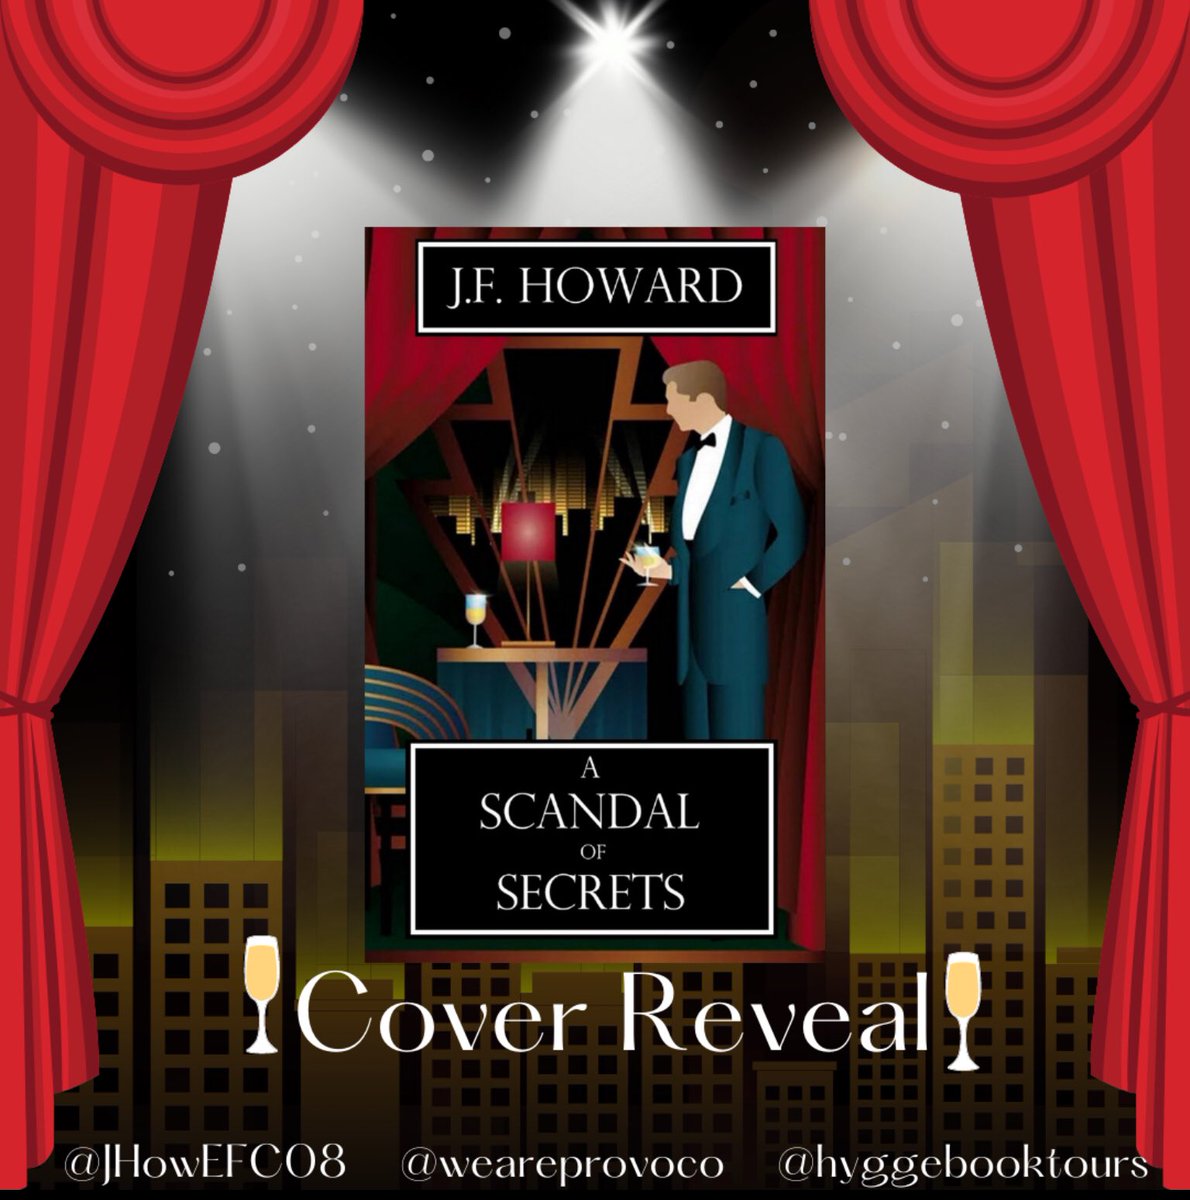 Cover Reveal🎉 @JHowEFC08 #ascandalofsecrets @WeAreProvoco @hyggebooktours #hyggebooktours #booktwt #booktwitter #booktwittercommunity #authorpromo #bookpromo